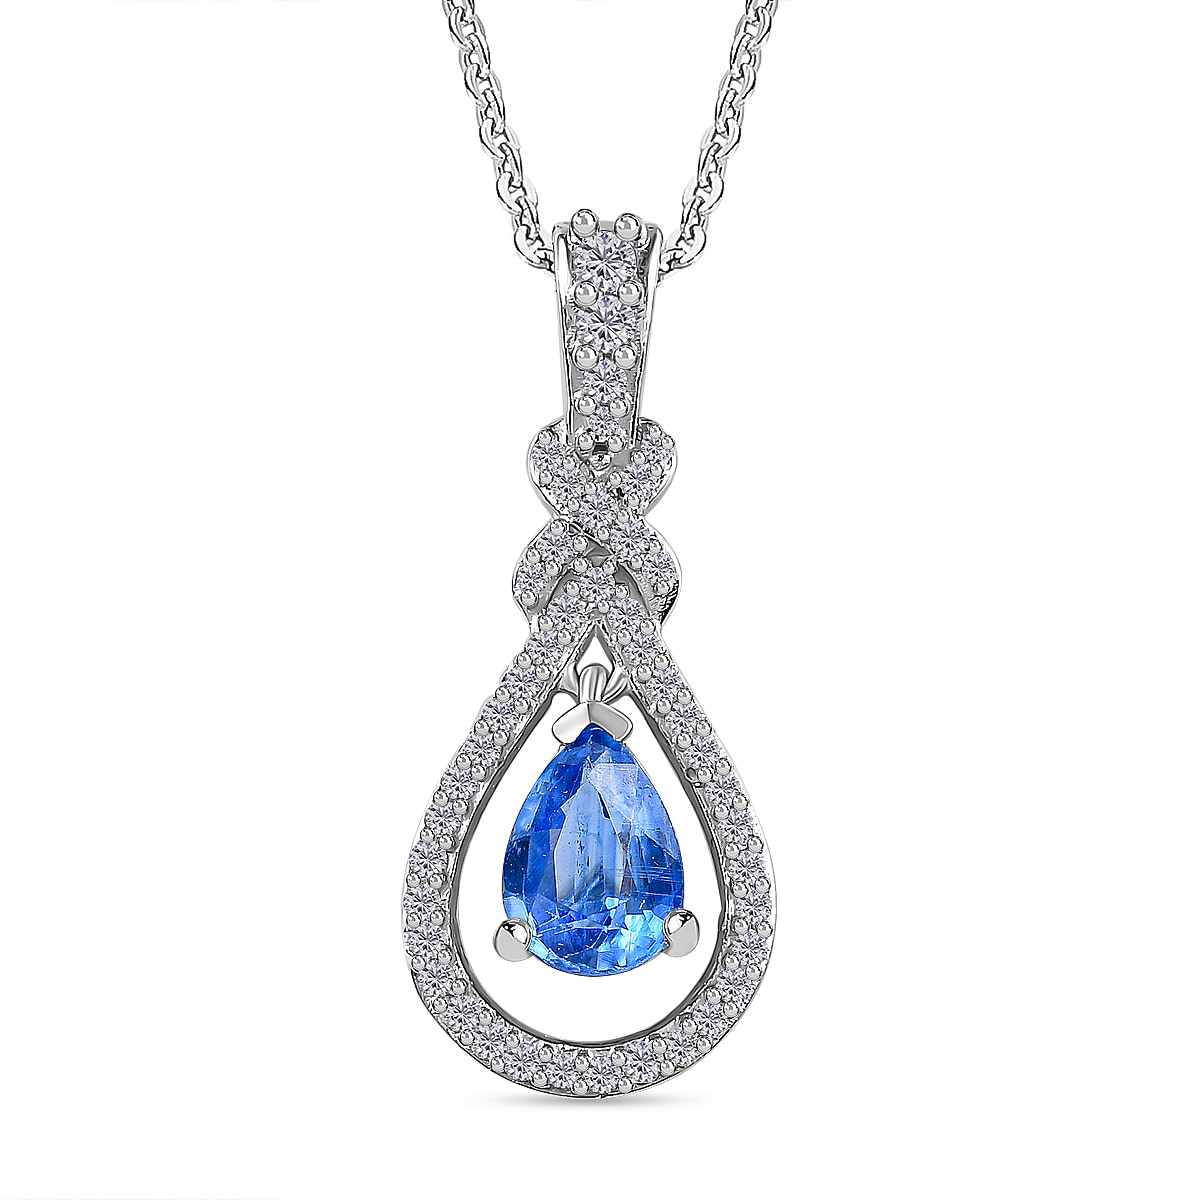 Natural Himalayan Kyanite & White Zircon Pendant with Chain (Size 20) in Platinum Overlay Sterling Silver 1.32 Ct.